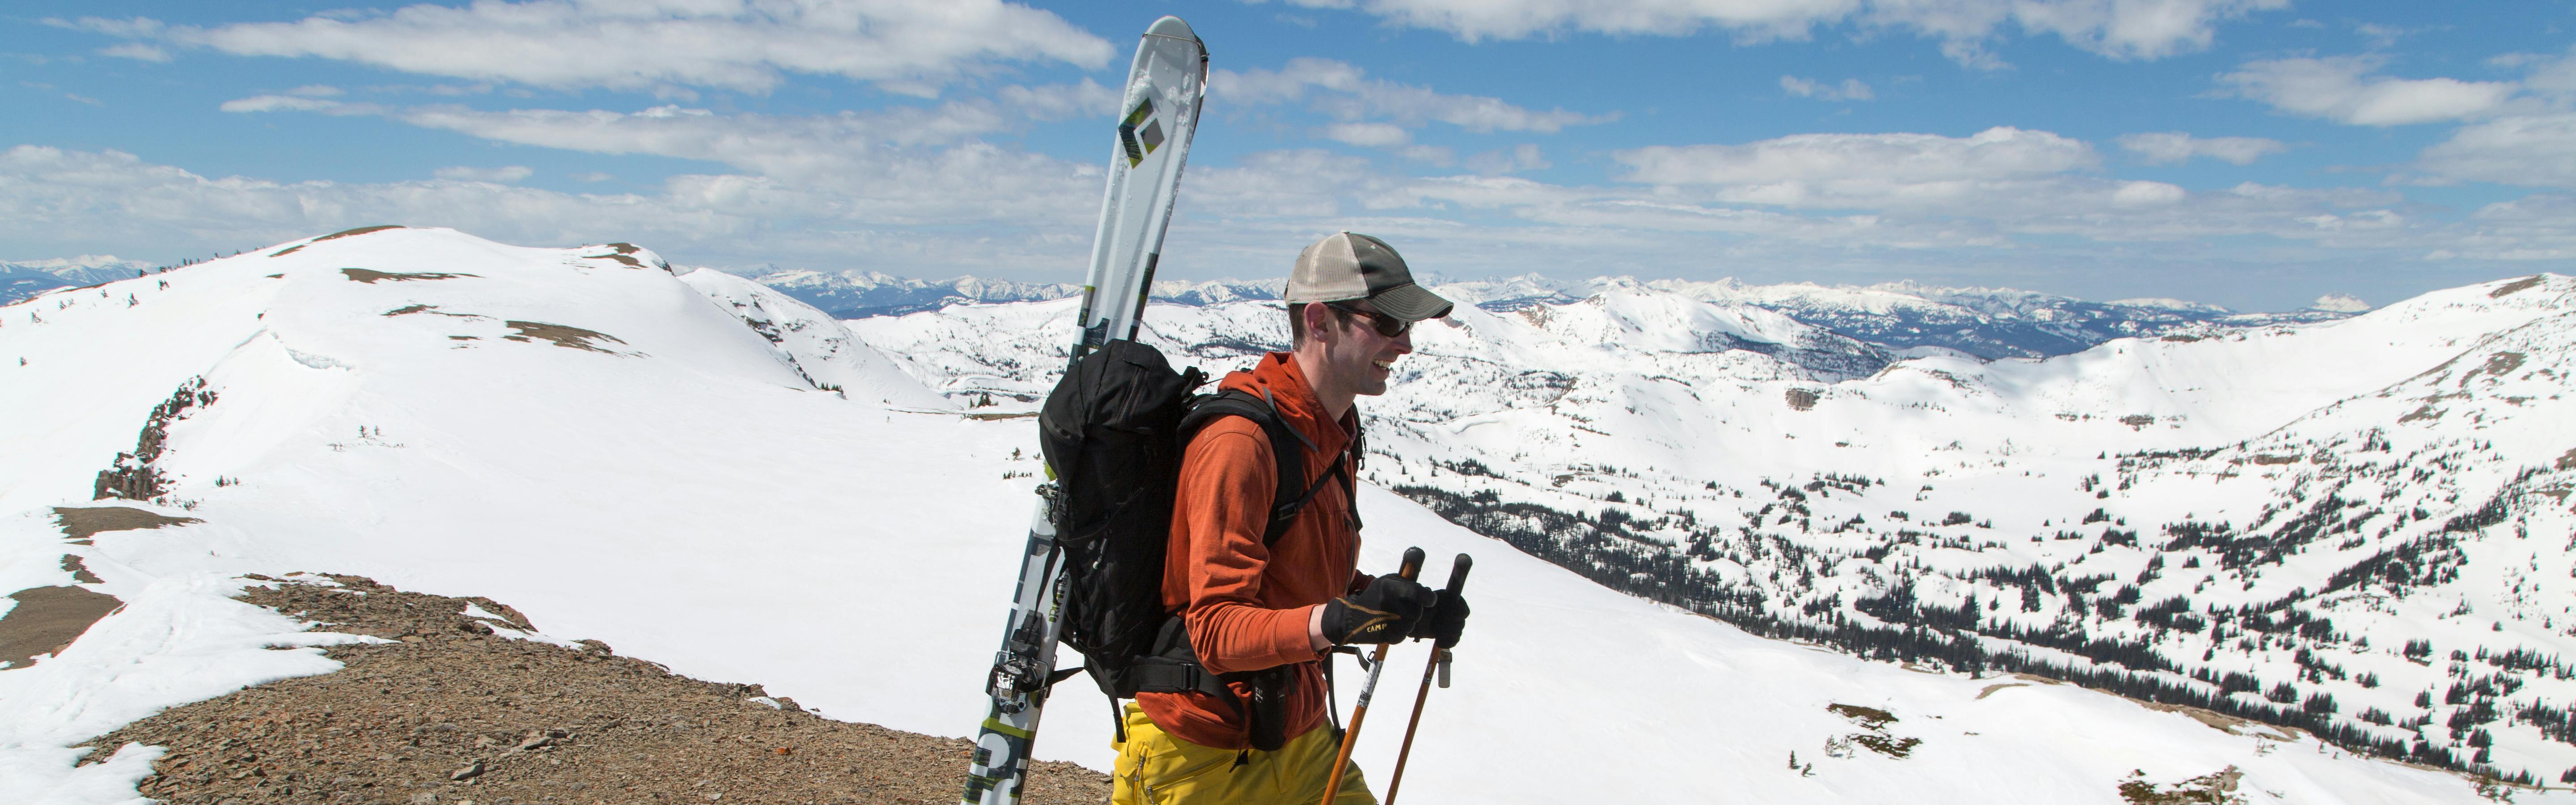 A man walks on a ridgeline that is partly snowy and partly rocky. He wears one light layer and carries his skis on his backpack. 